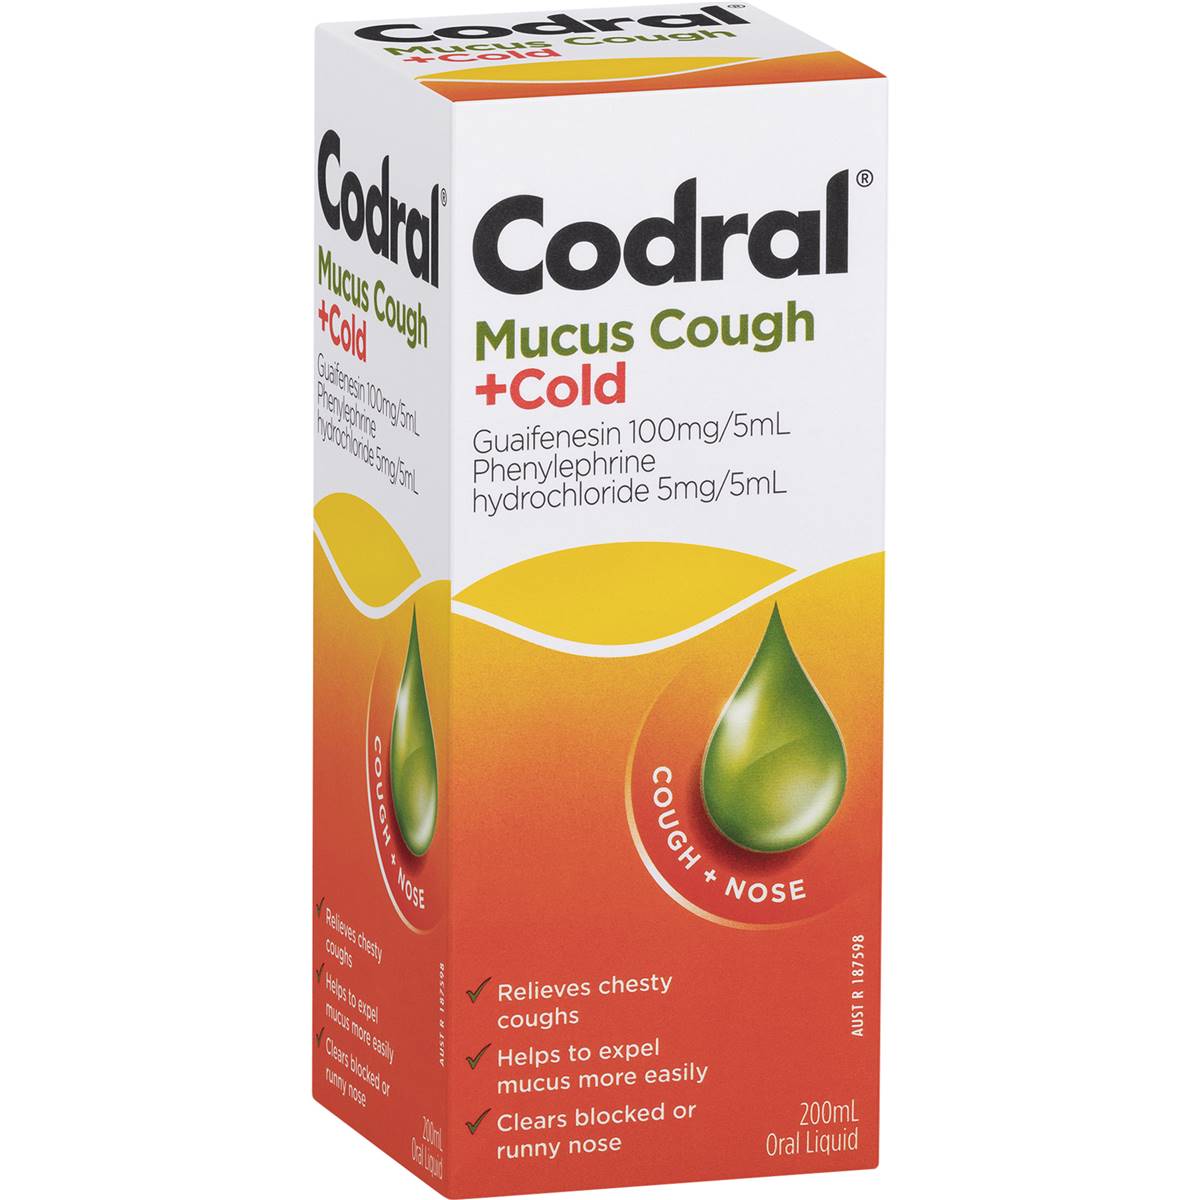 Codral Relief Mucus Cough & Cold